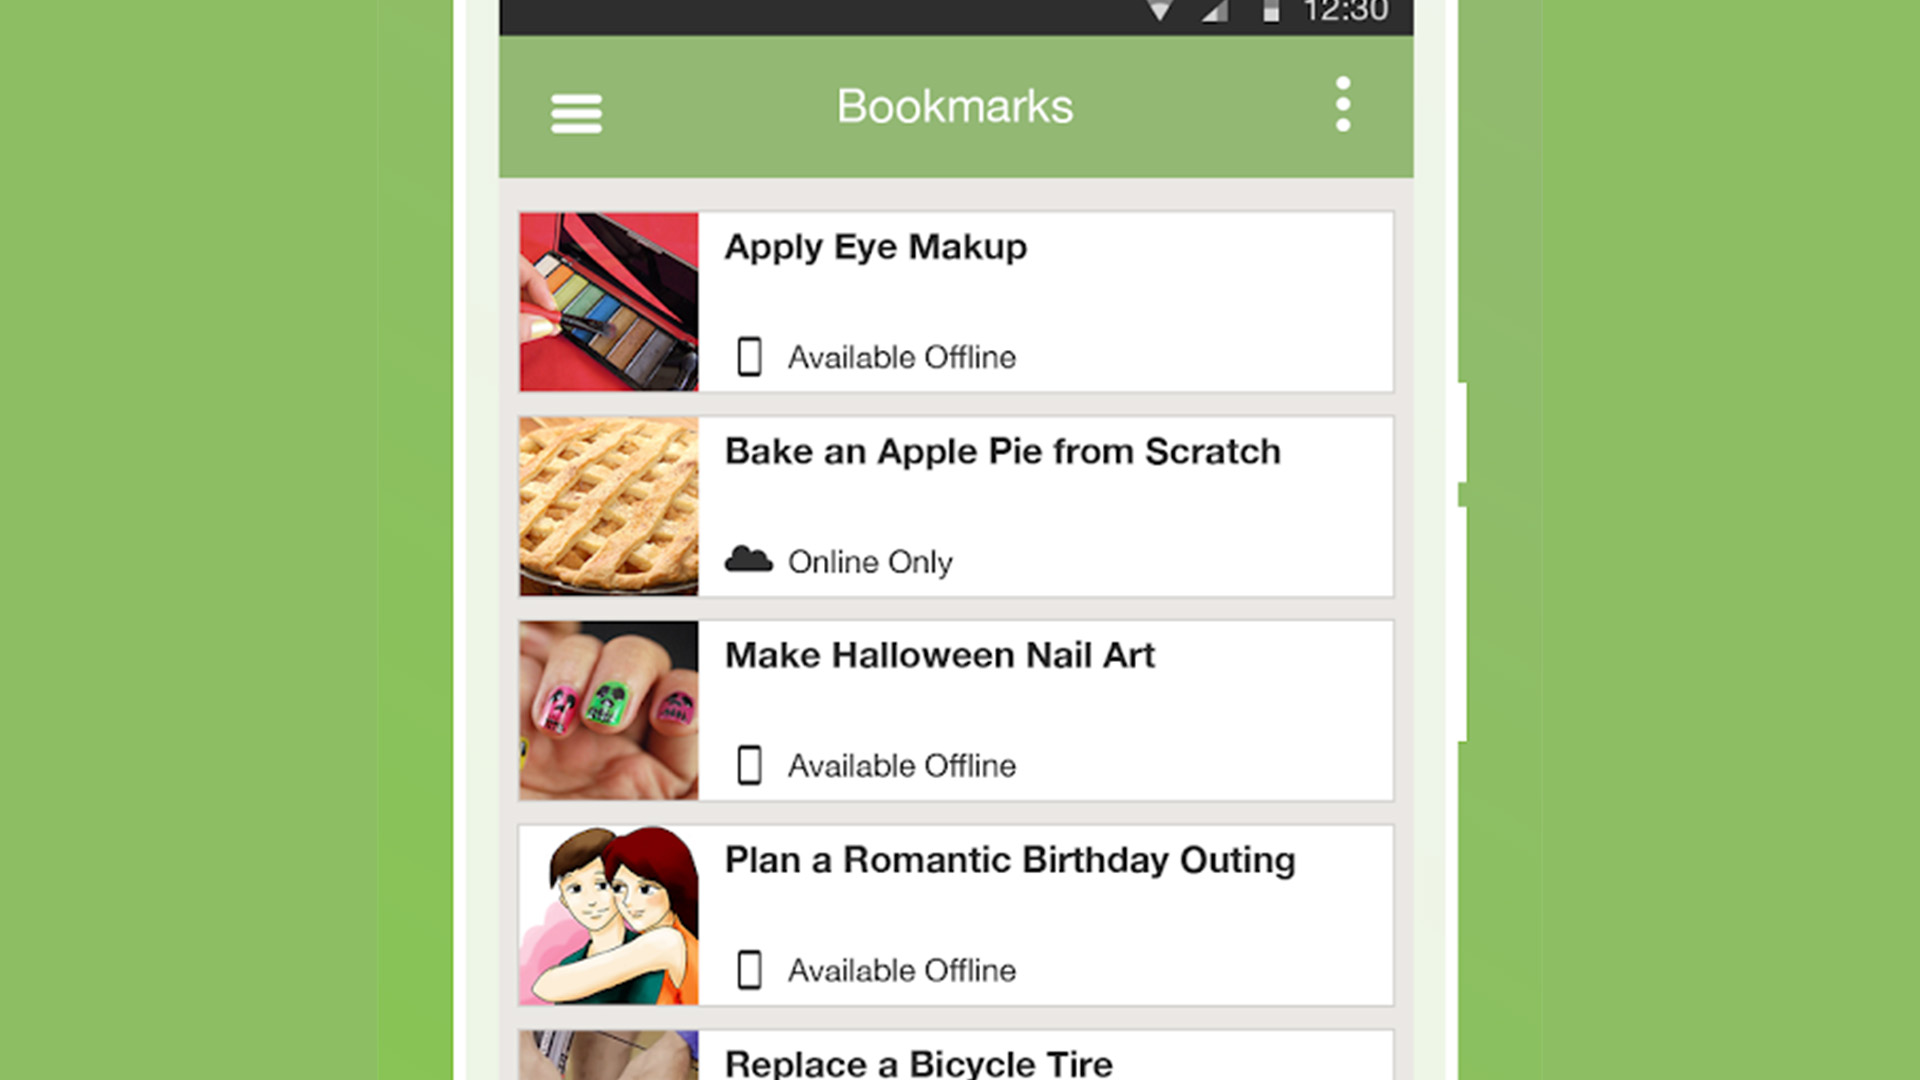 https://www.androidauthority.com/wp-content/uploads/2019/10/WikiHow-best-crafts-apps-for-Android.jpg